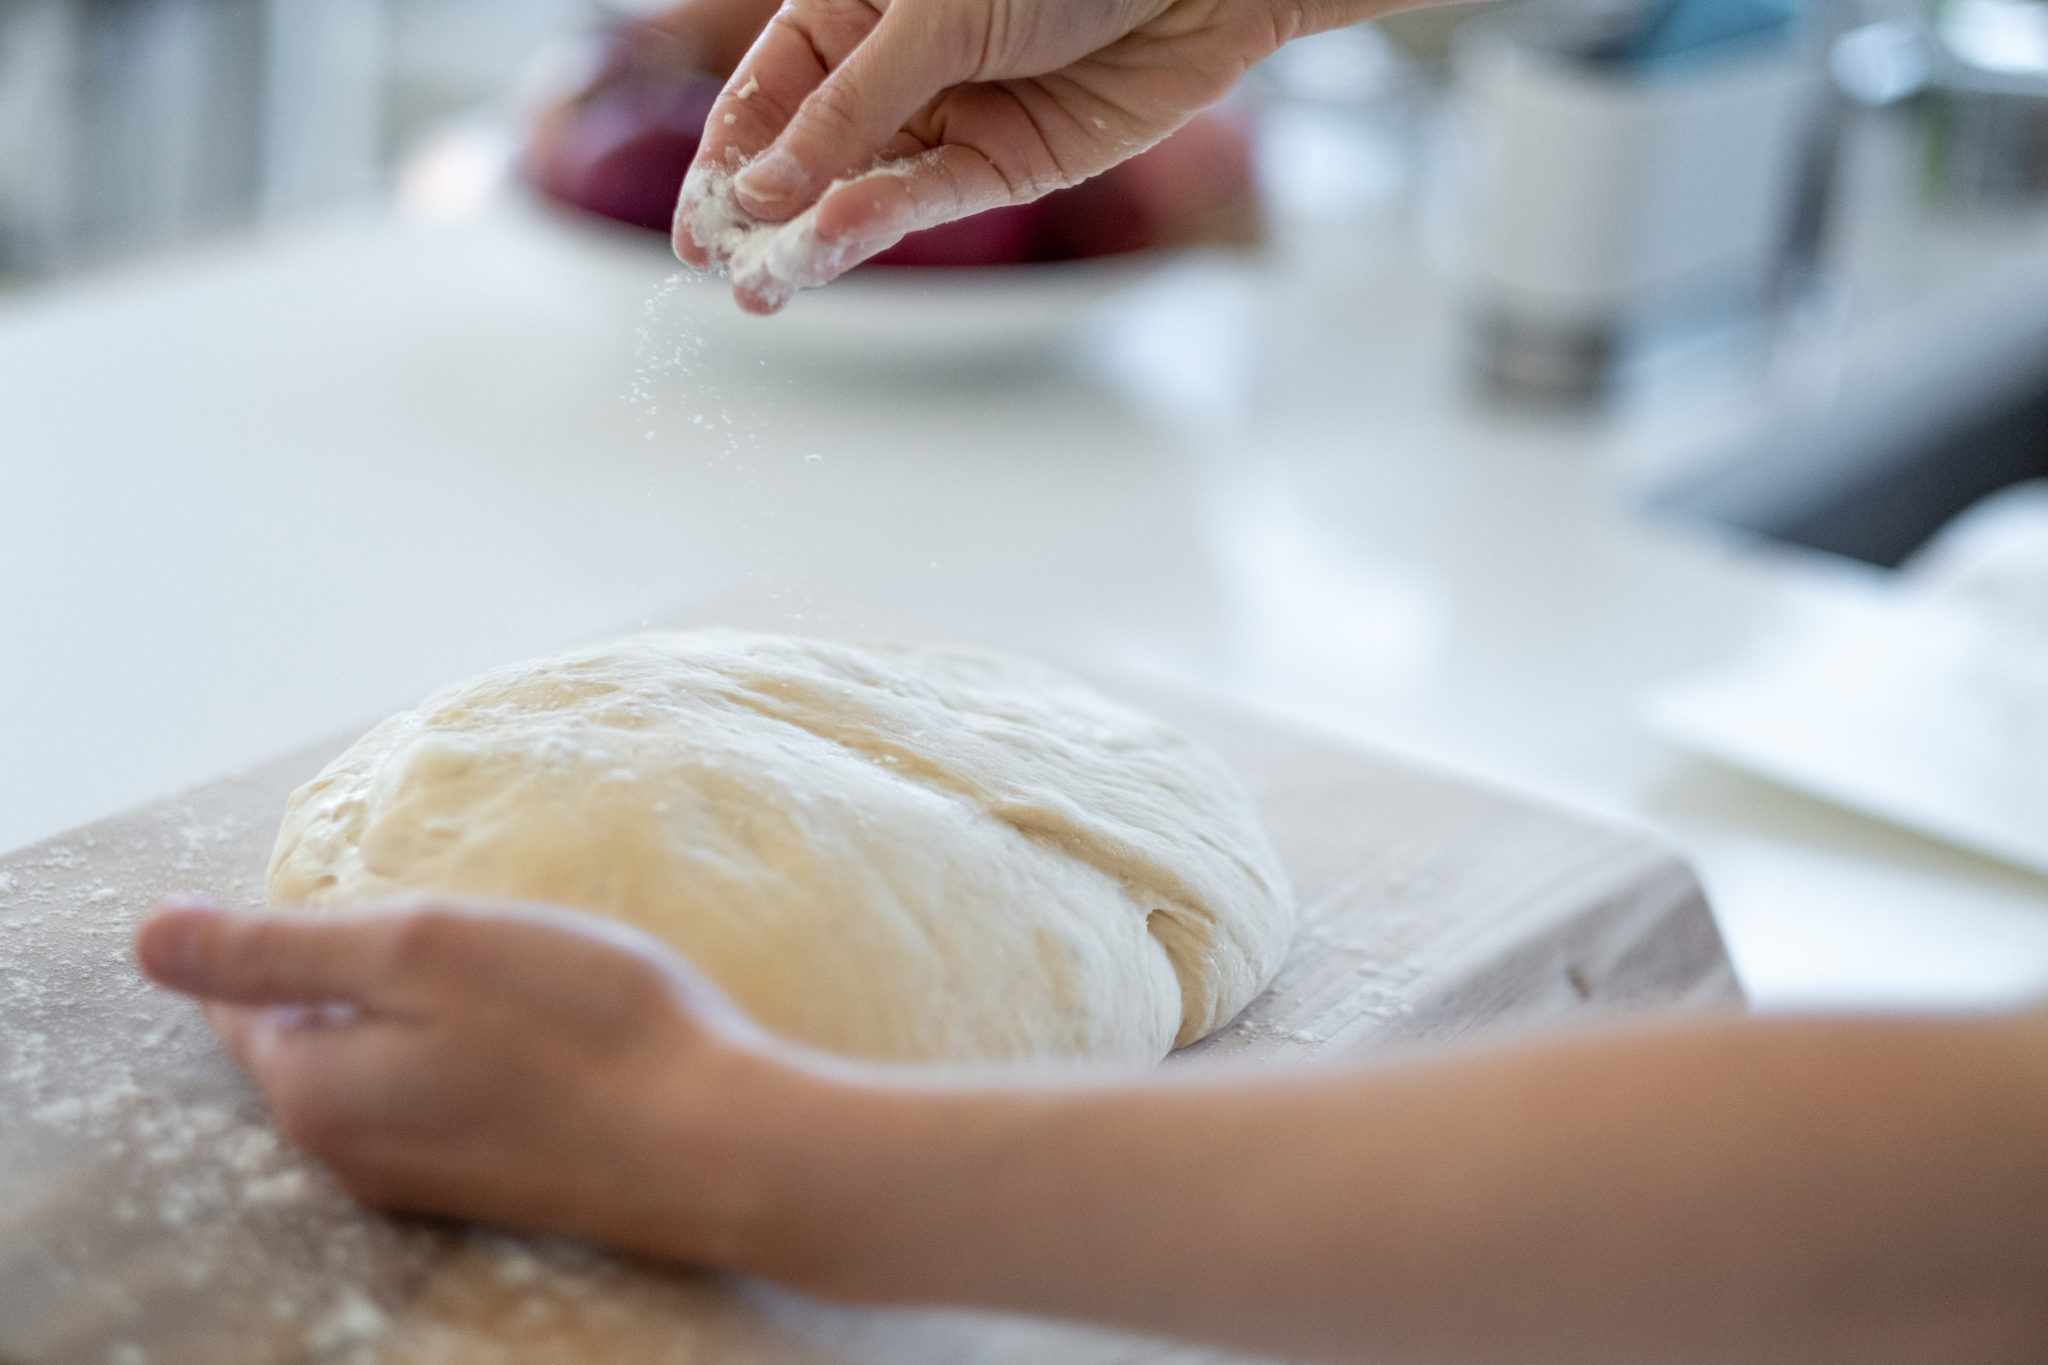 bread dough being sprinkled with flour